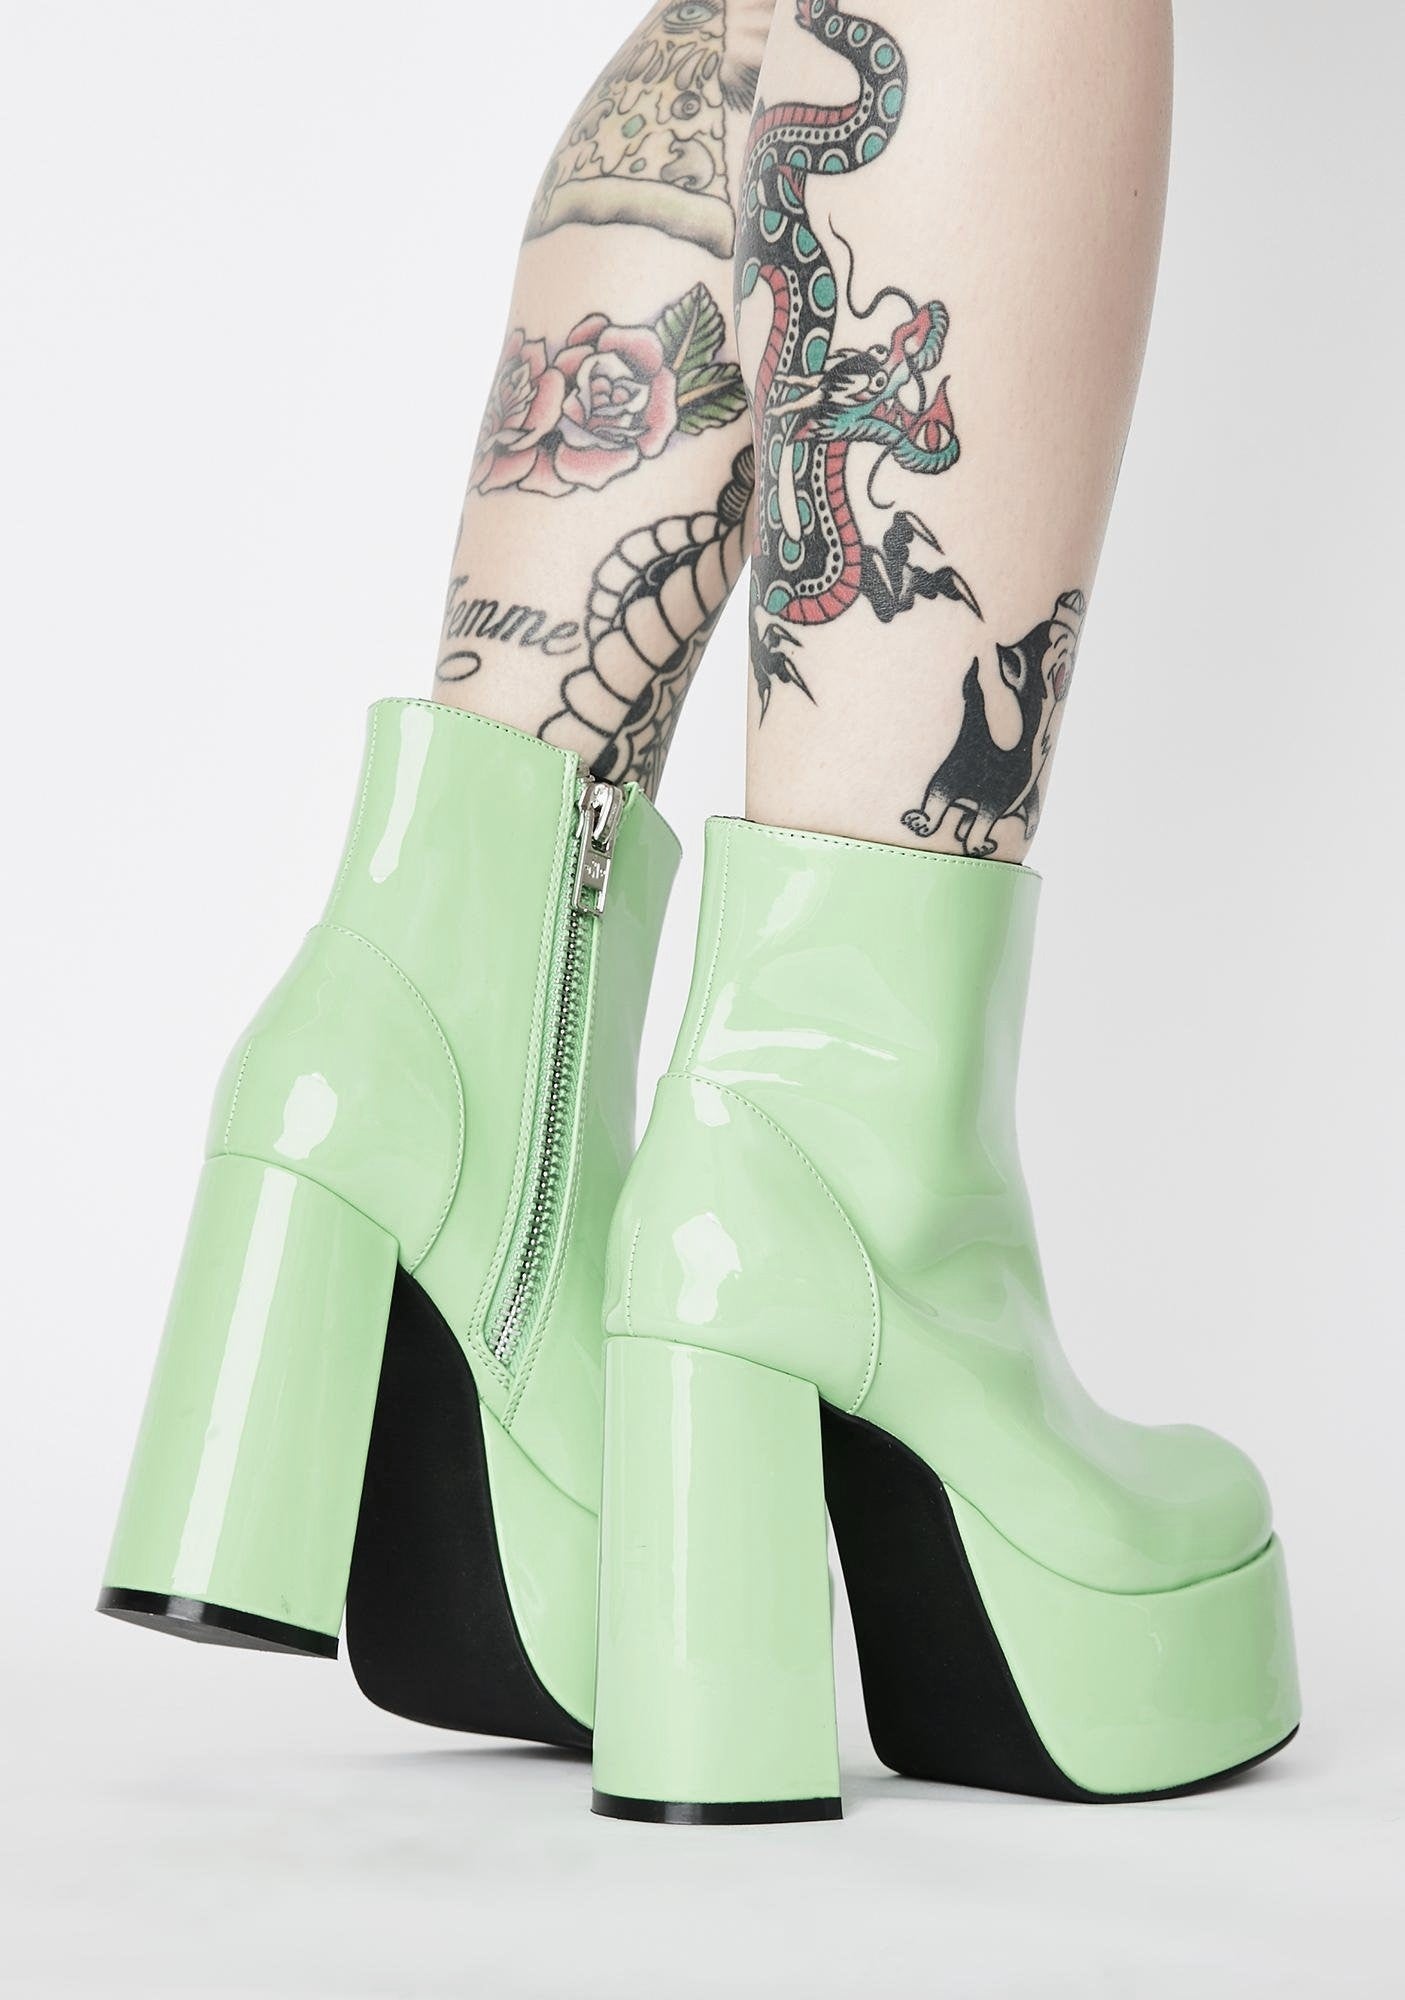 Glossy pastel green patent leather platform gogo boots. Ankle length with round toe and chunky block heel. Inspired by the 1960's gogo boots. Zip up closure.